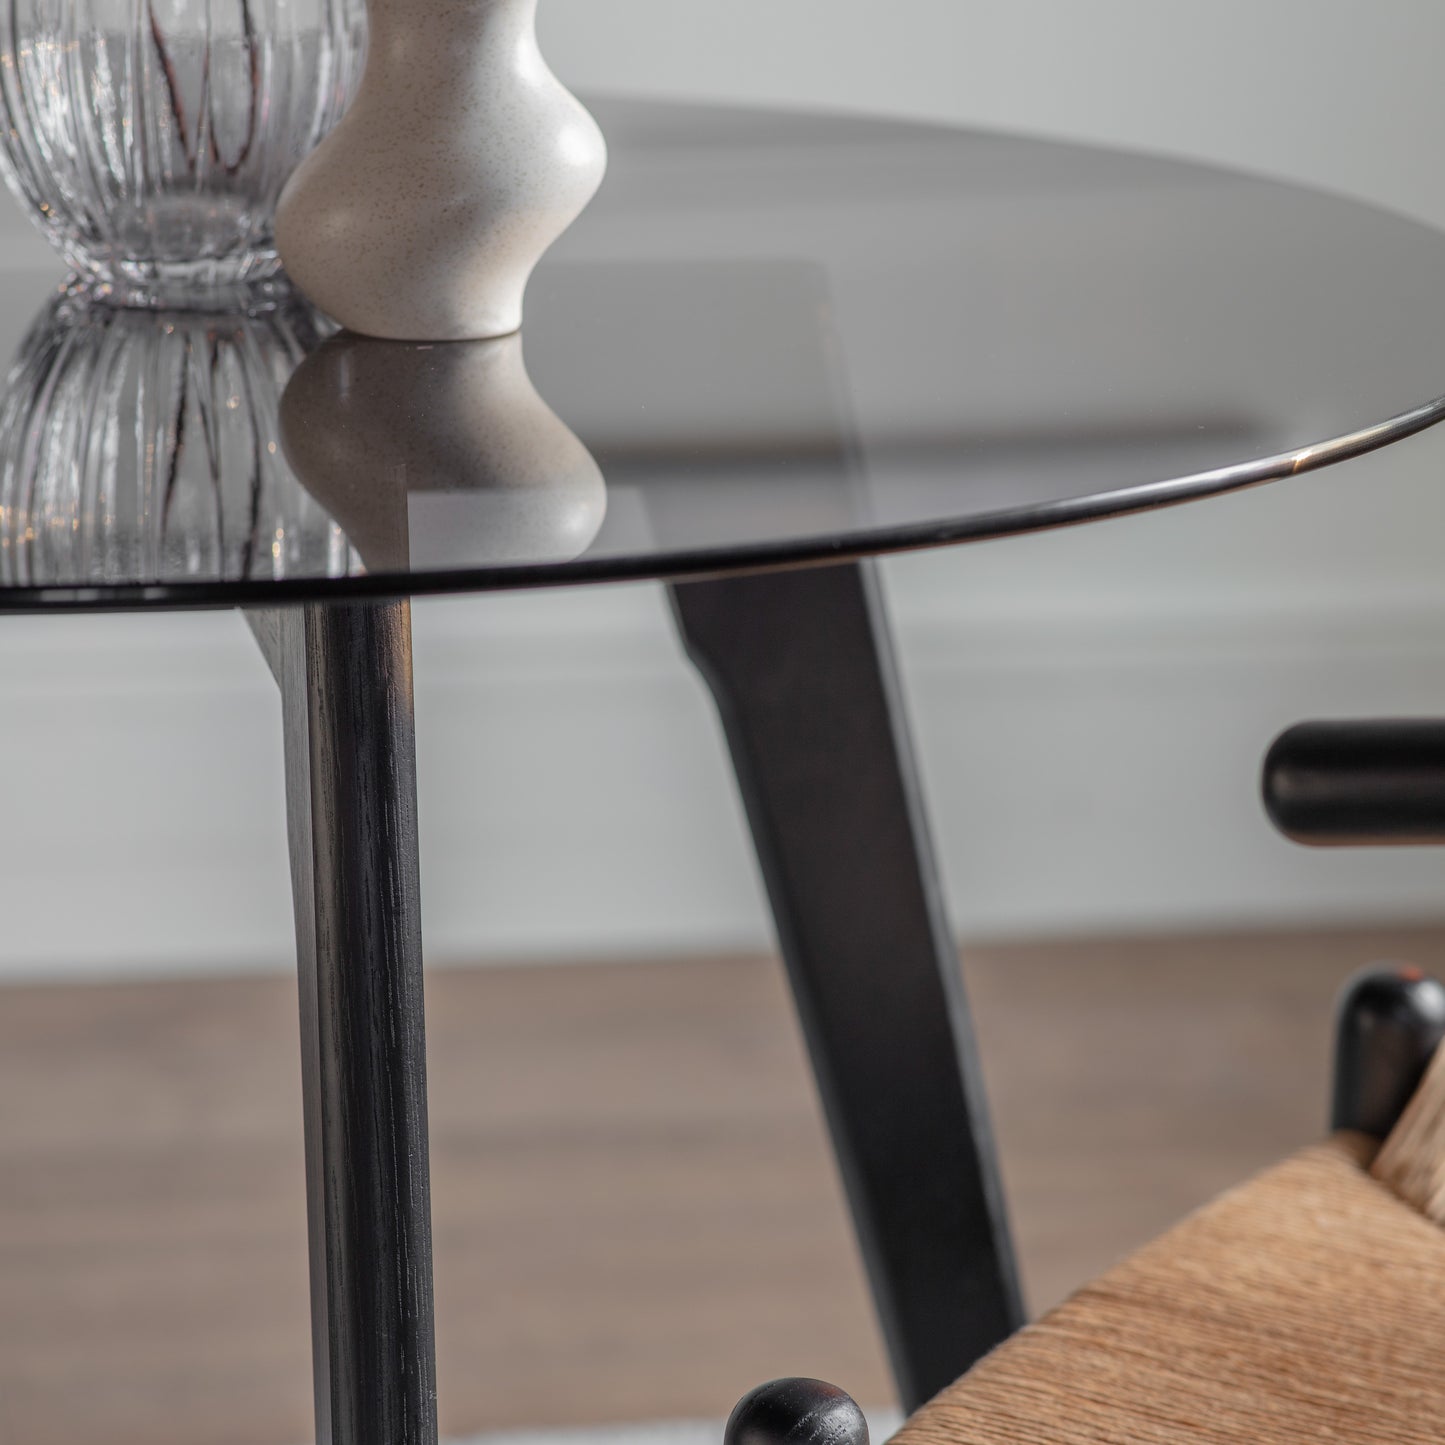 A stylish Ashprington Round Dining Table in Black with a glass top for interior decor or home furniture.